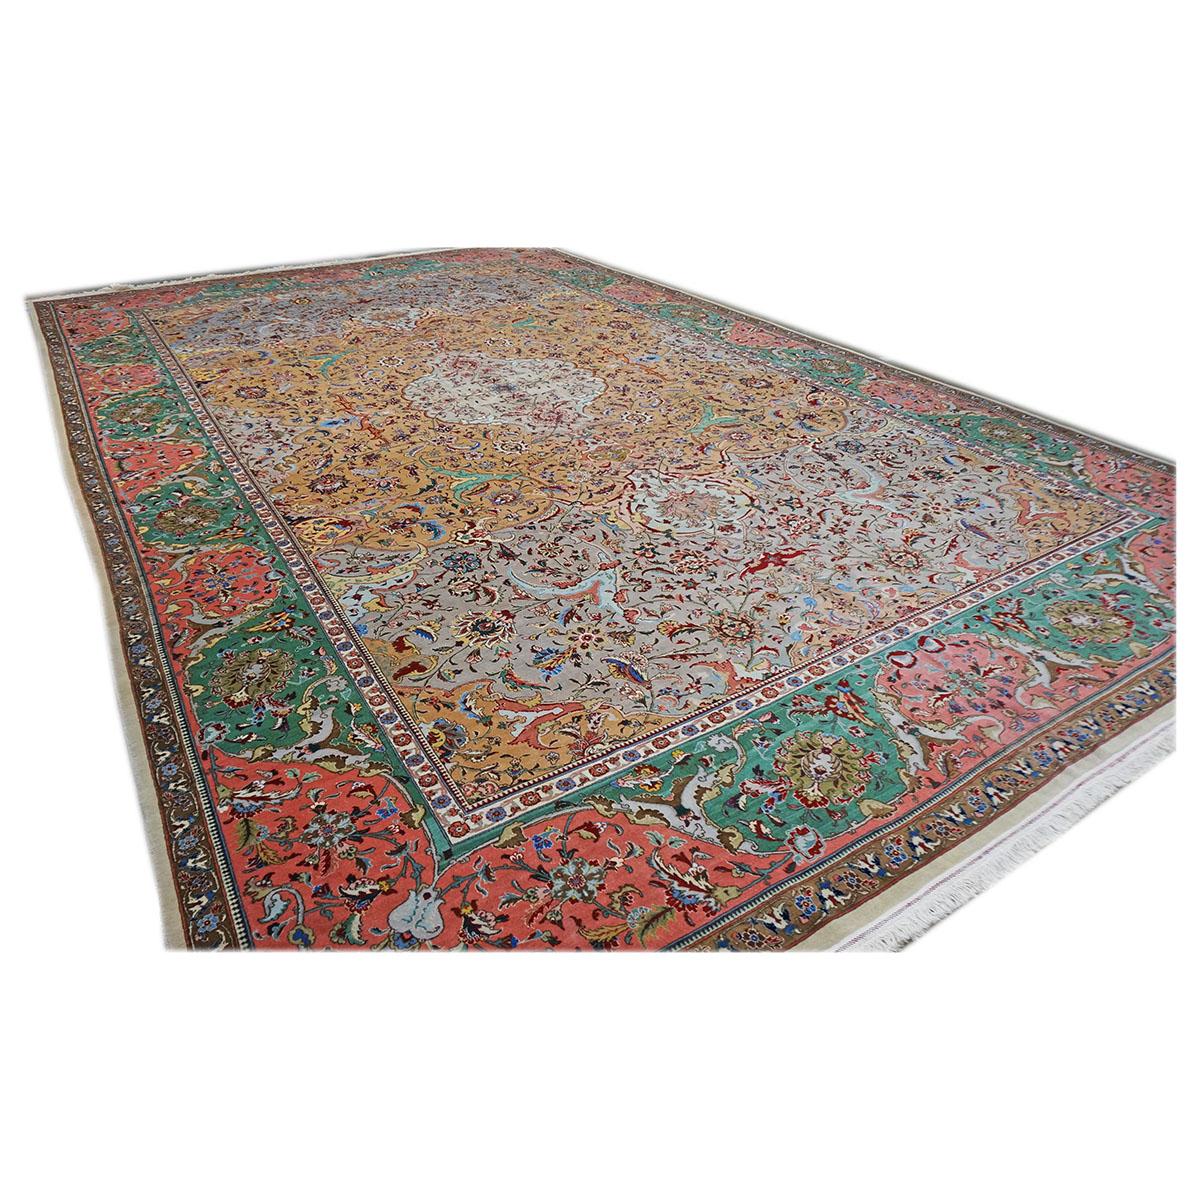 Antique 1940s Persian Tabriz 11x17 Grey, Green, Pink, & Orange Handmade Area Rug In Good Condition For Sale In Houston, TX